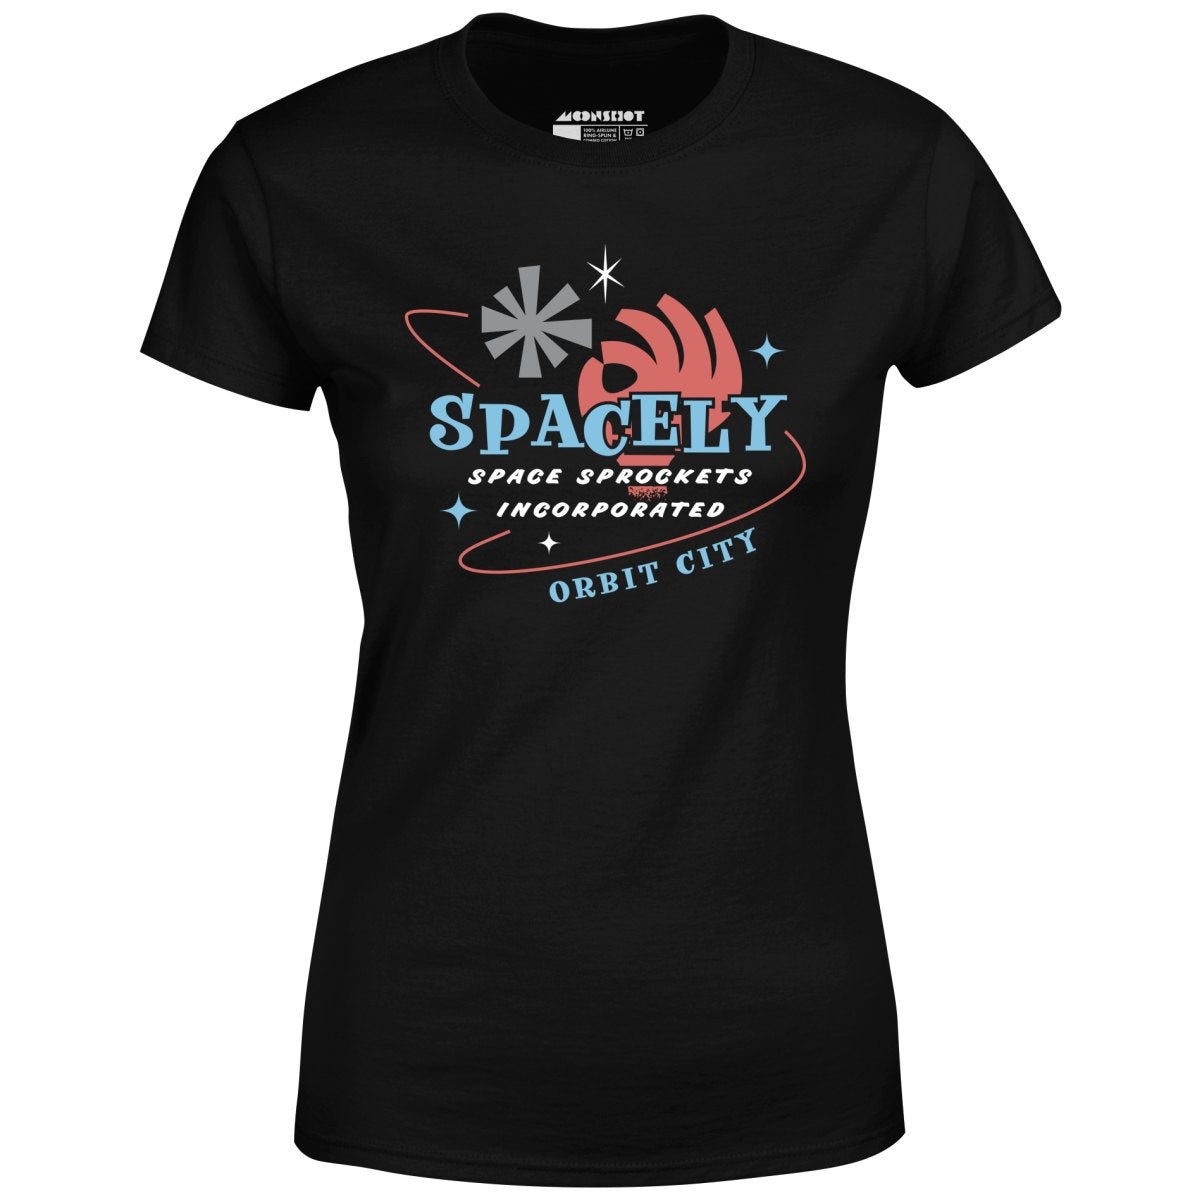 Spacely Space Sprockets - Women's T-Shirt